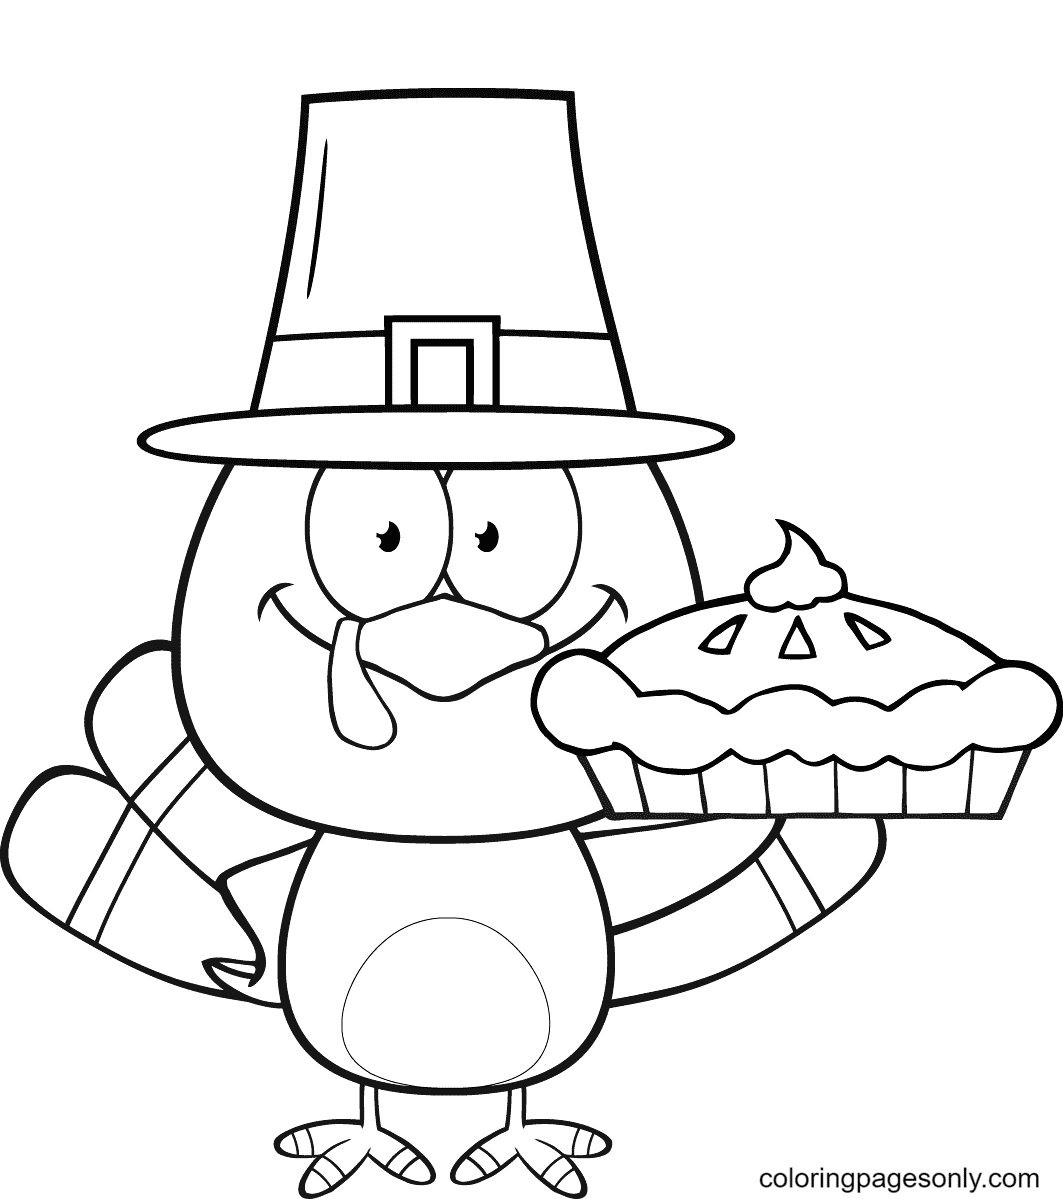 Cute Pilgrim Turkey Holding A Pie Coloring Pages